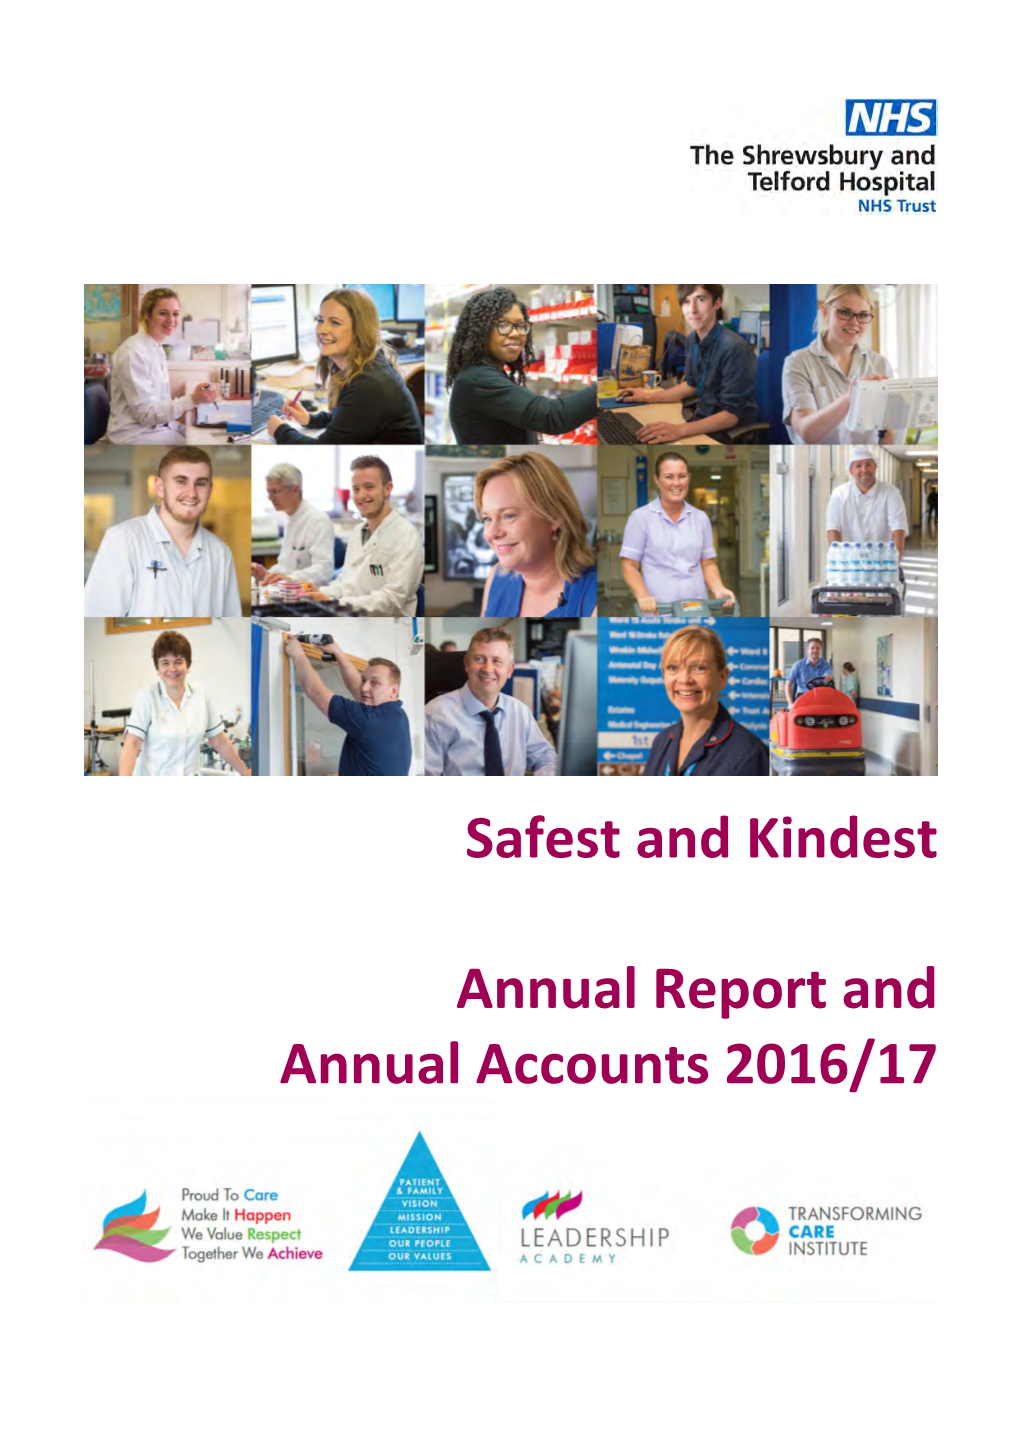 Safest and Kindest Annual Report and Annual Accounts 2016/17